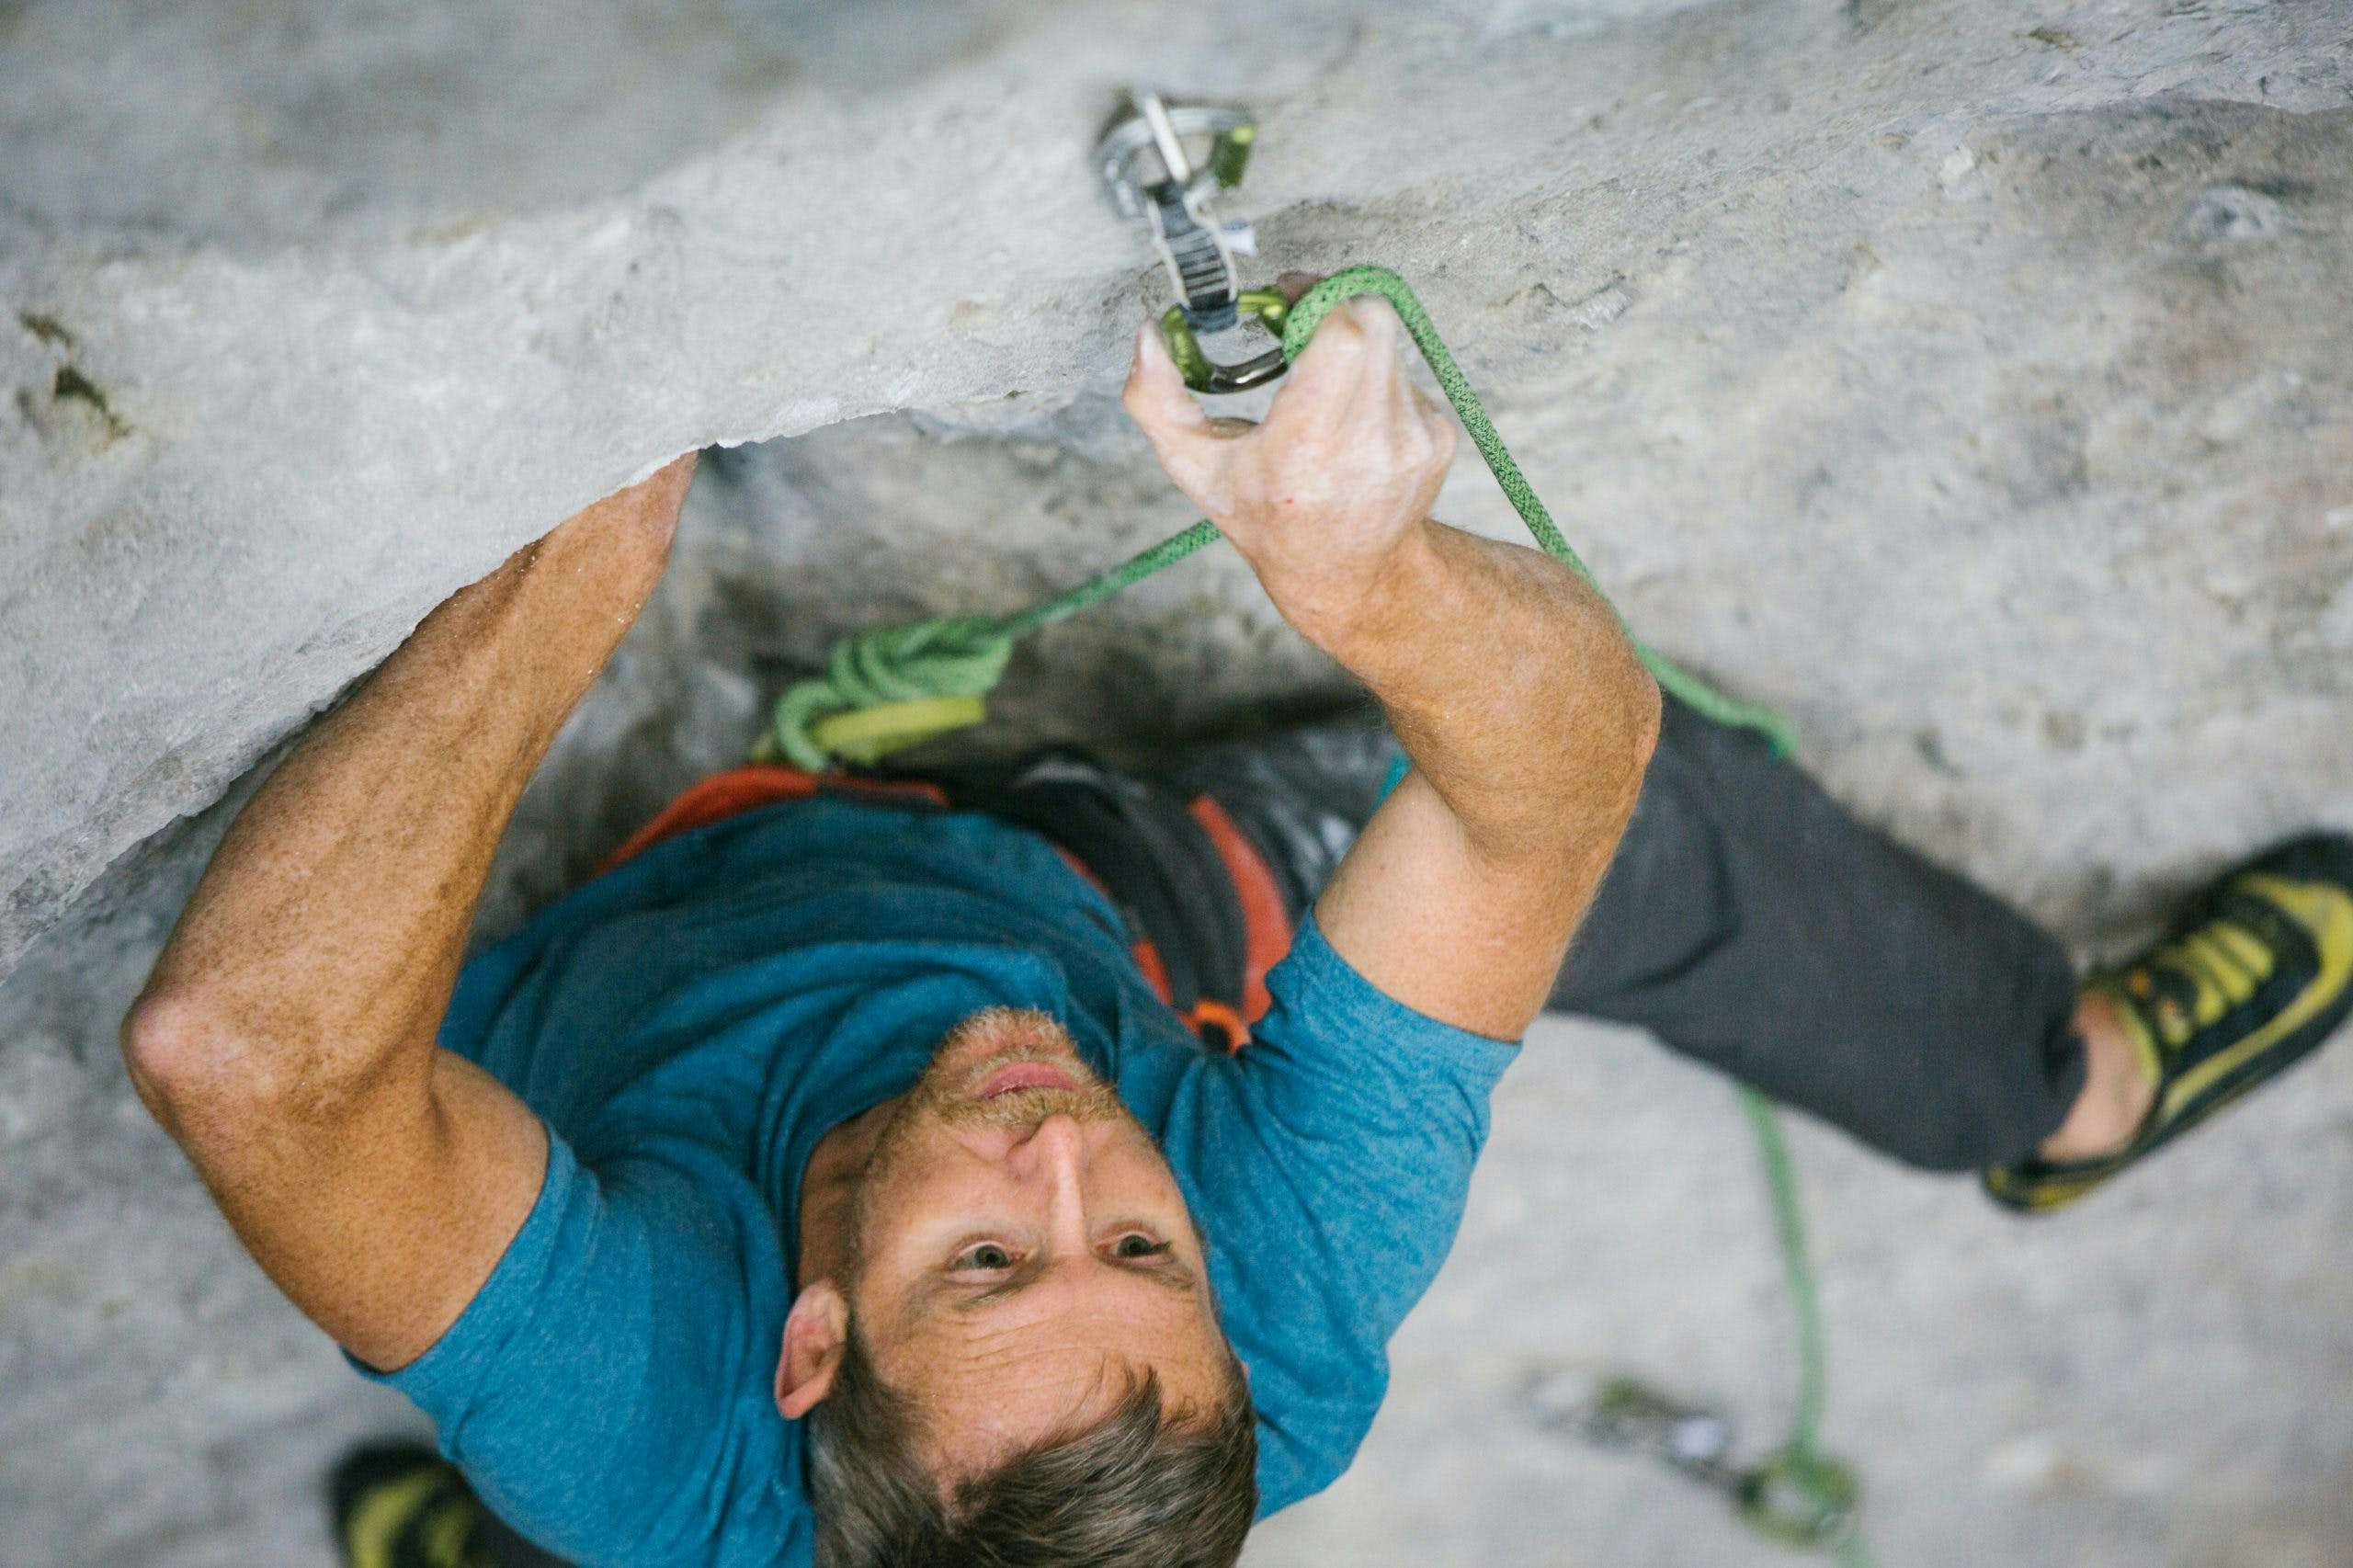 Close up of Tommy Caldwell clipping rope into a quickdraw while climbing